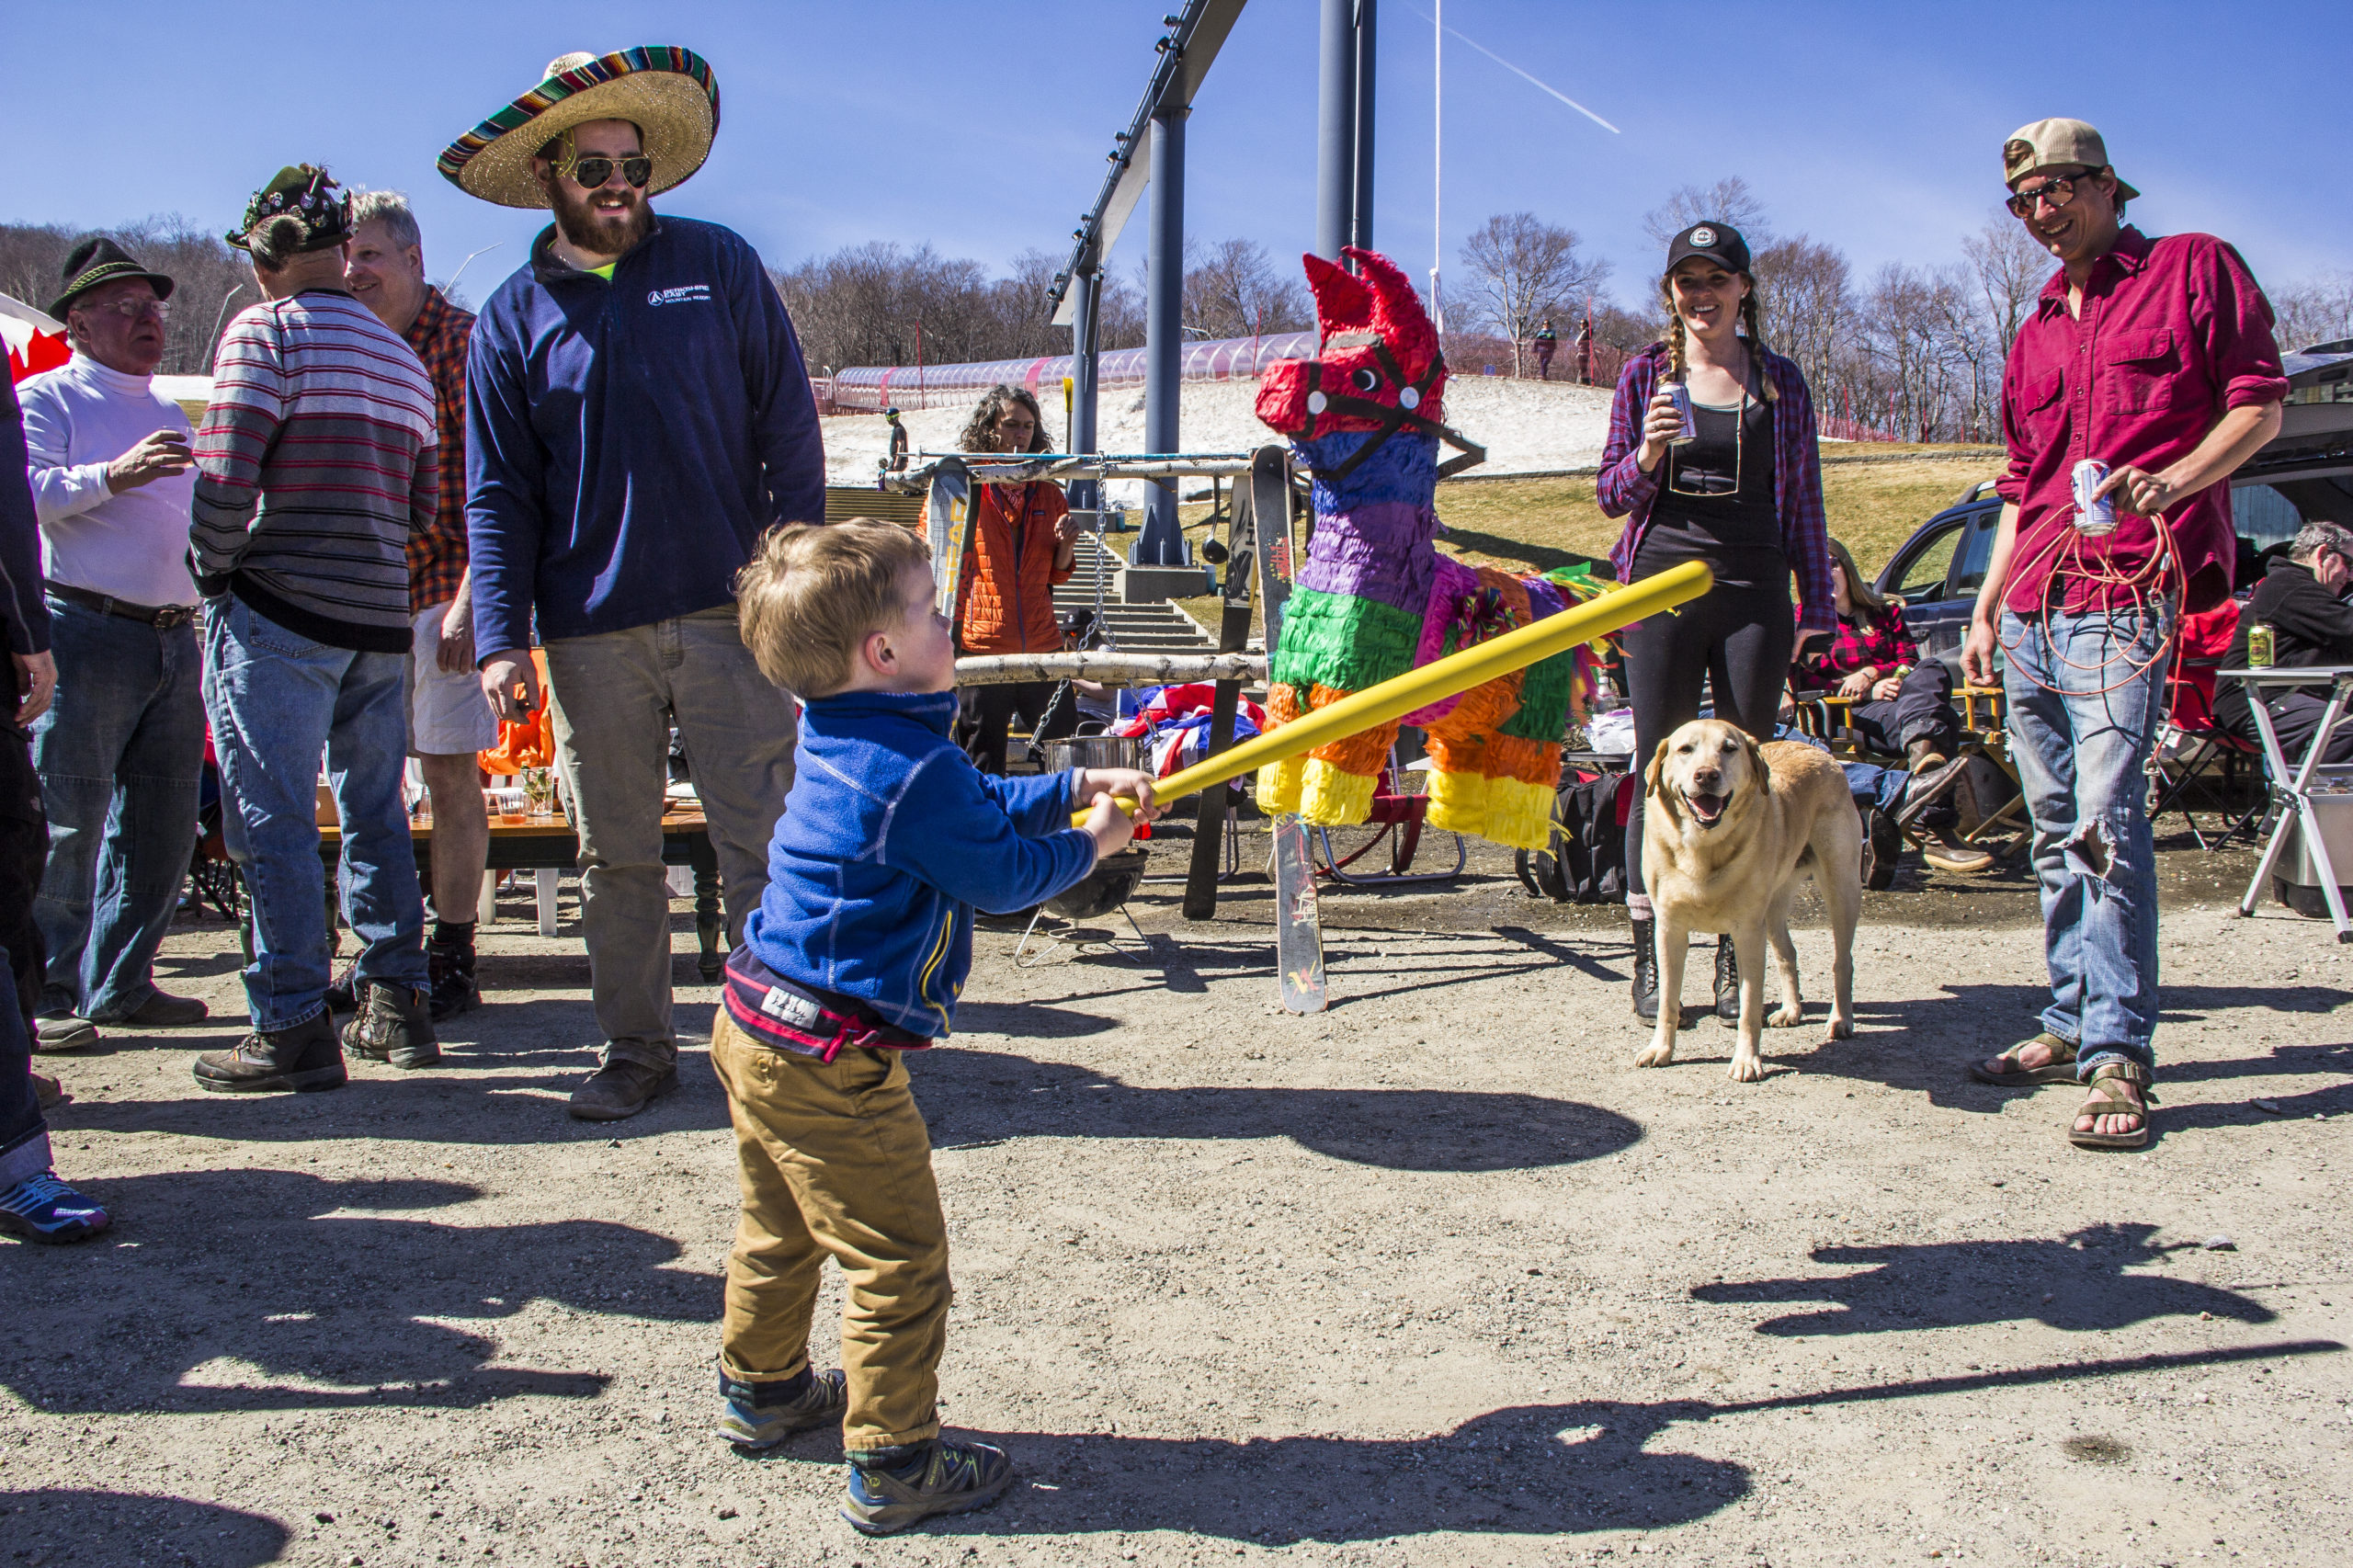 Family Spring Events at Vermont Ski Resorts